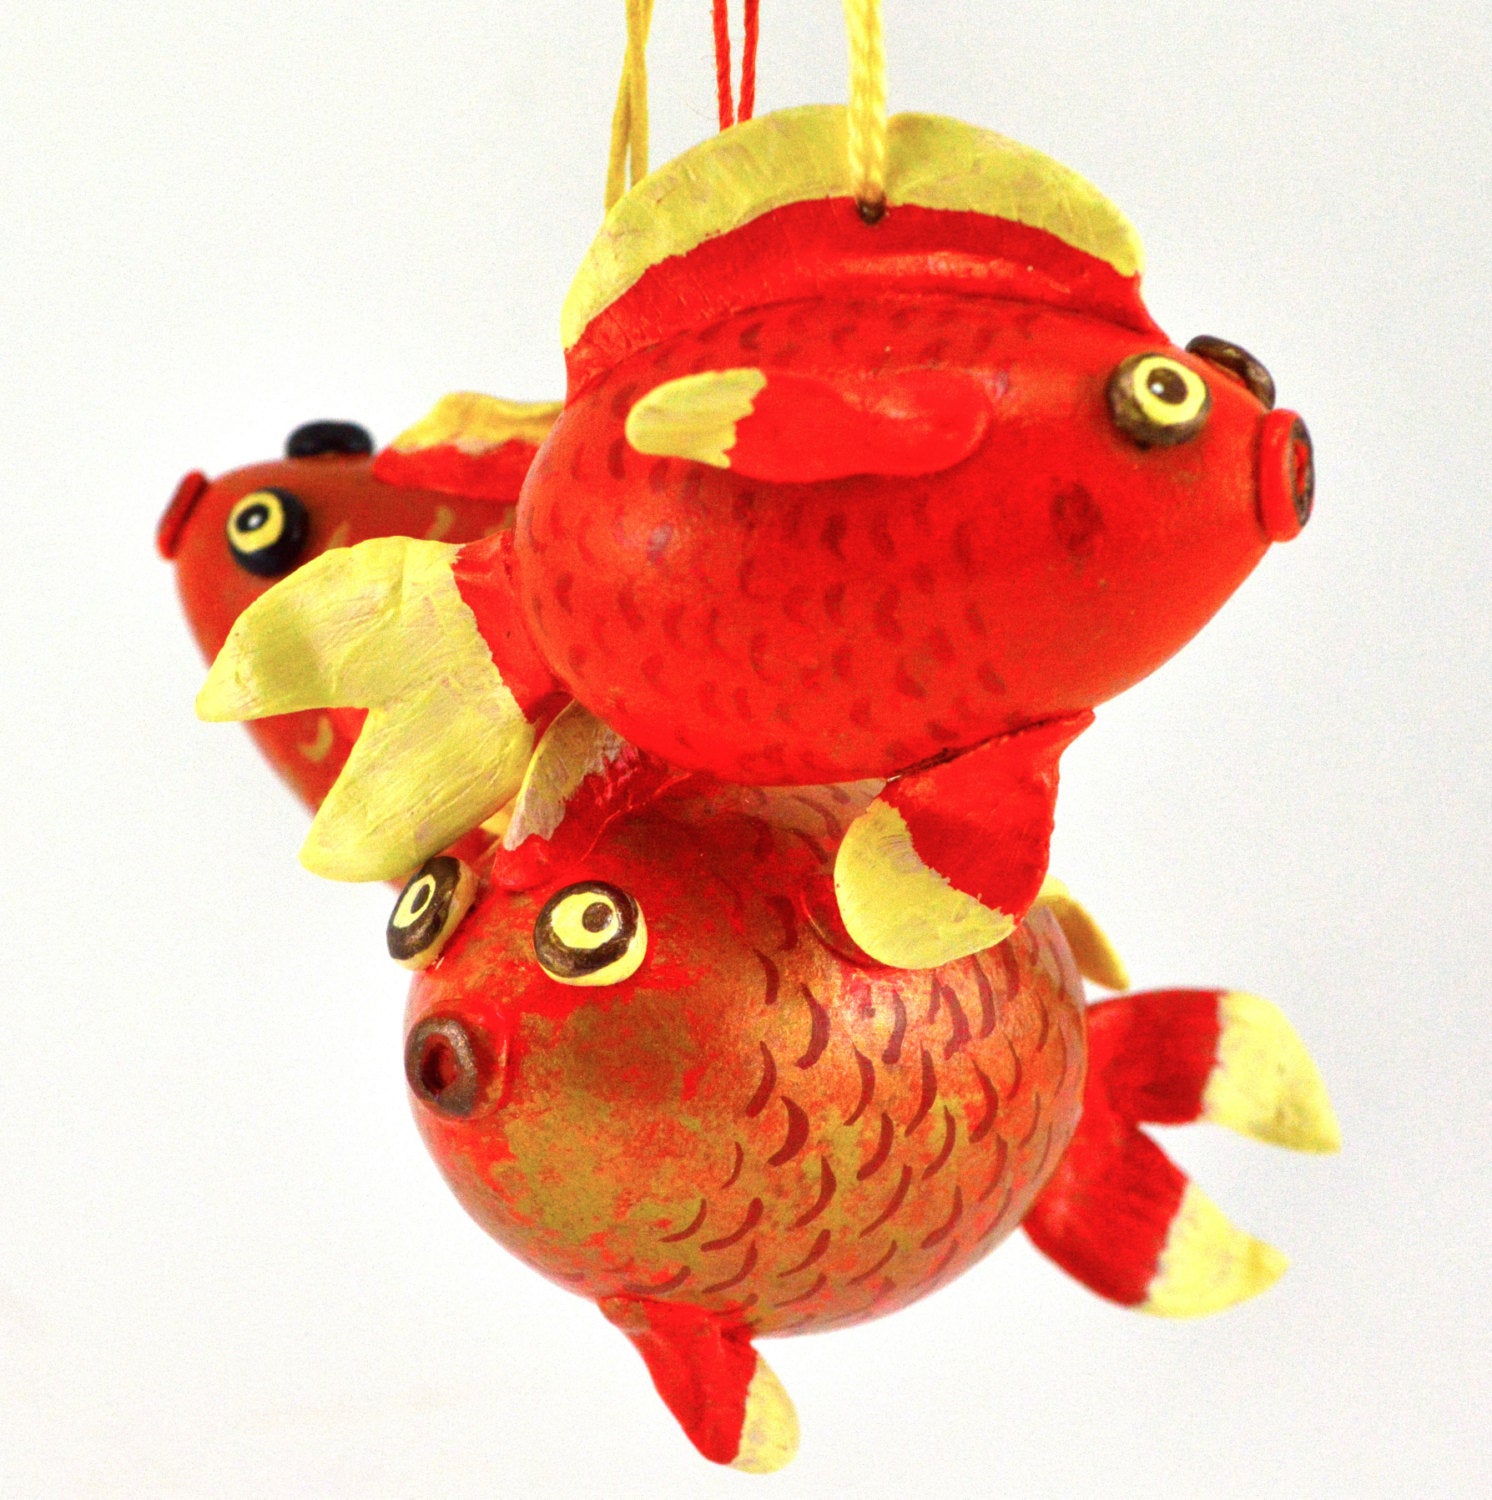 Goldfish Gift, Gourd Art, Gourdament, Holiday Ornament, fishing gift, Painted Gourd, Fish art, Unique gift, - Gourdaments